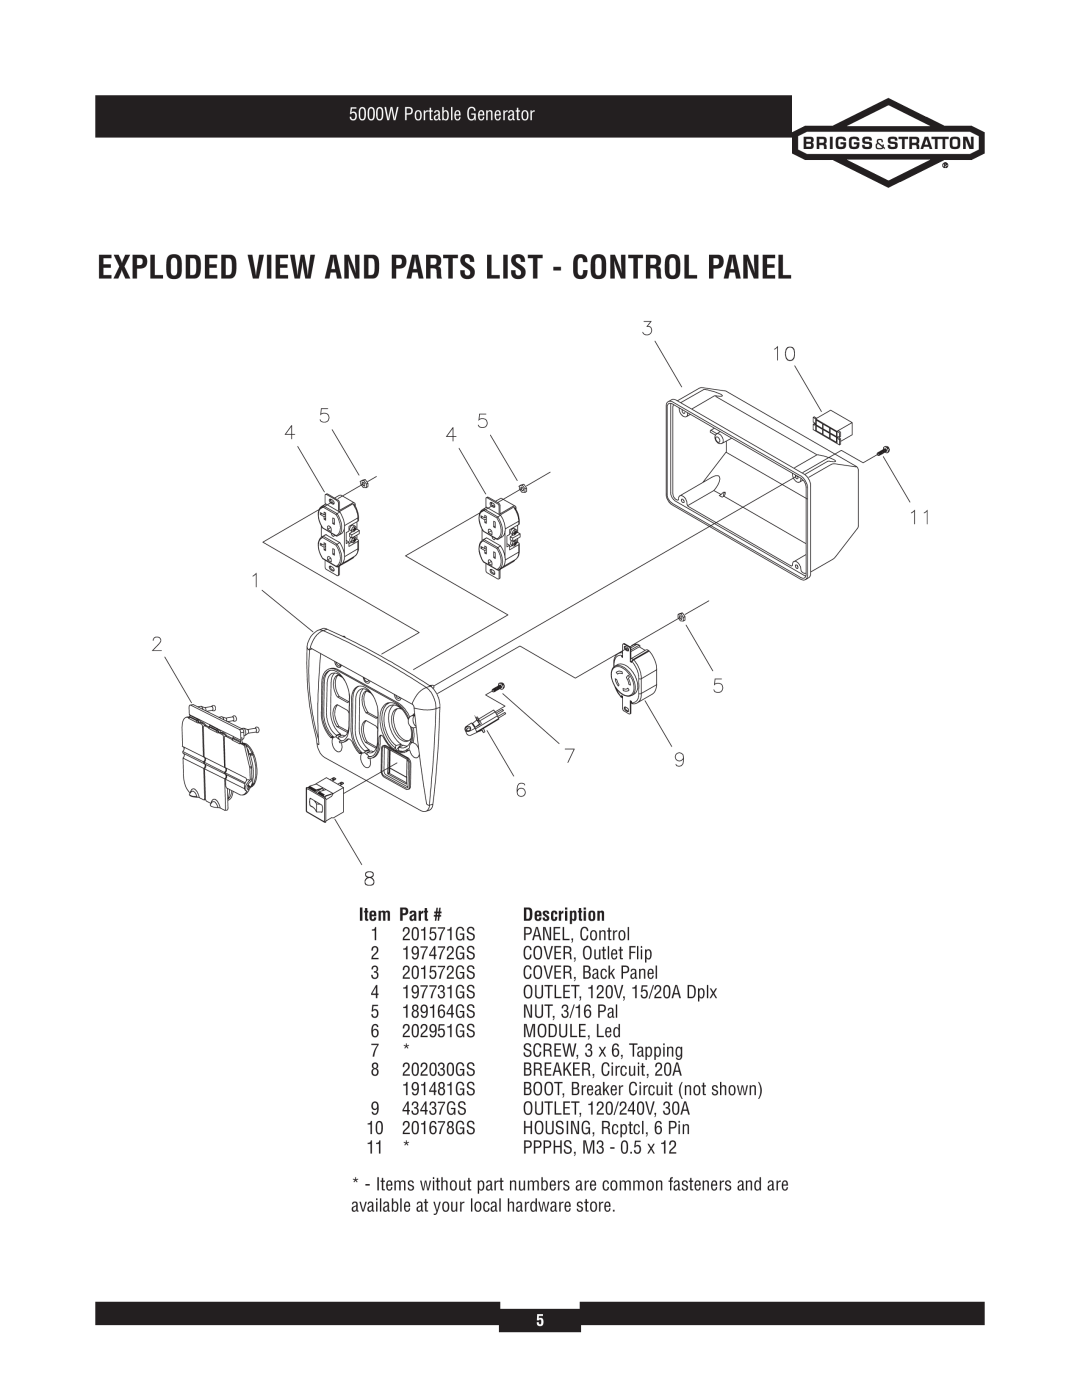 Briggs & Stratton 30361 manual Exploded View And Parts List - Control Panel, 5000W Portable Generator, Description 